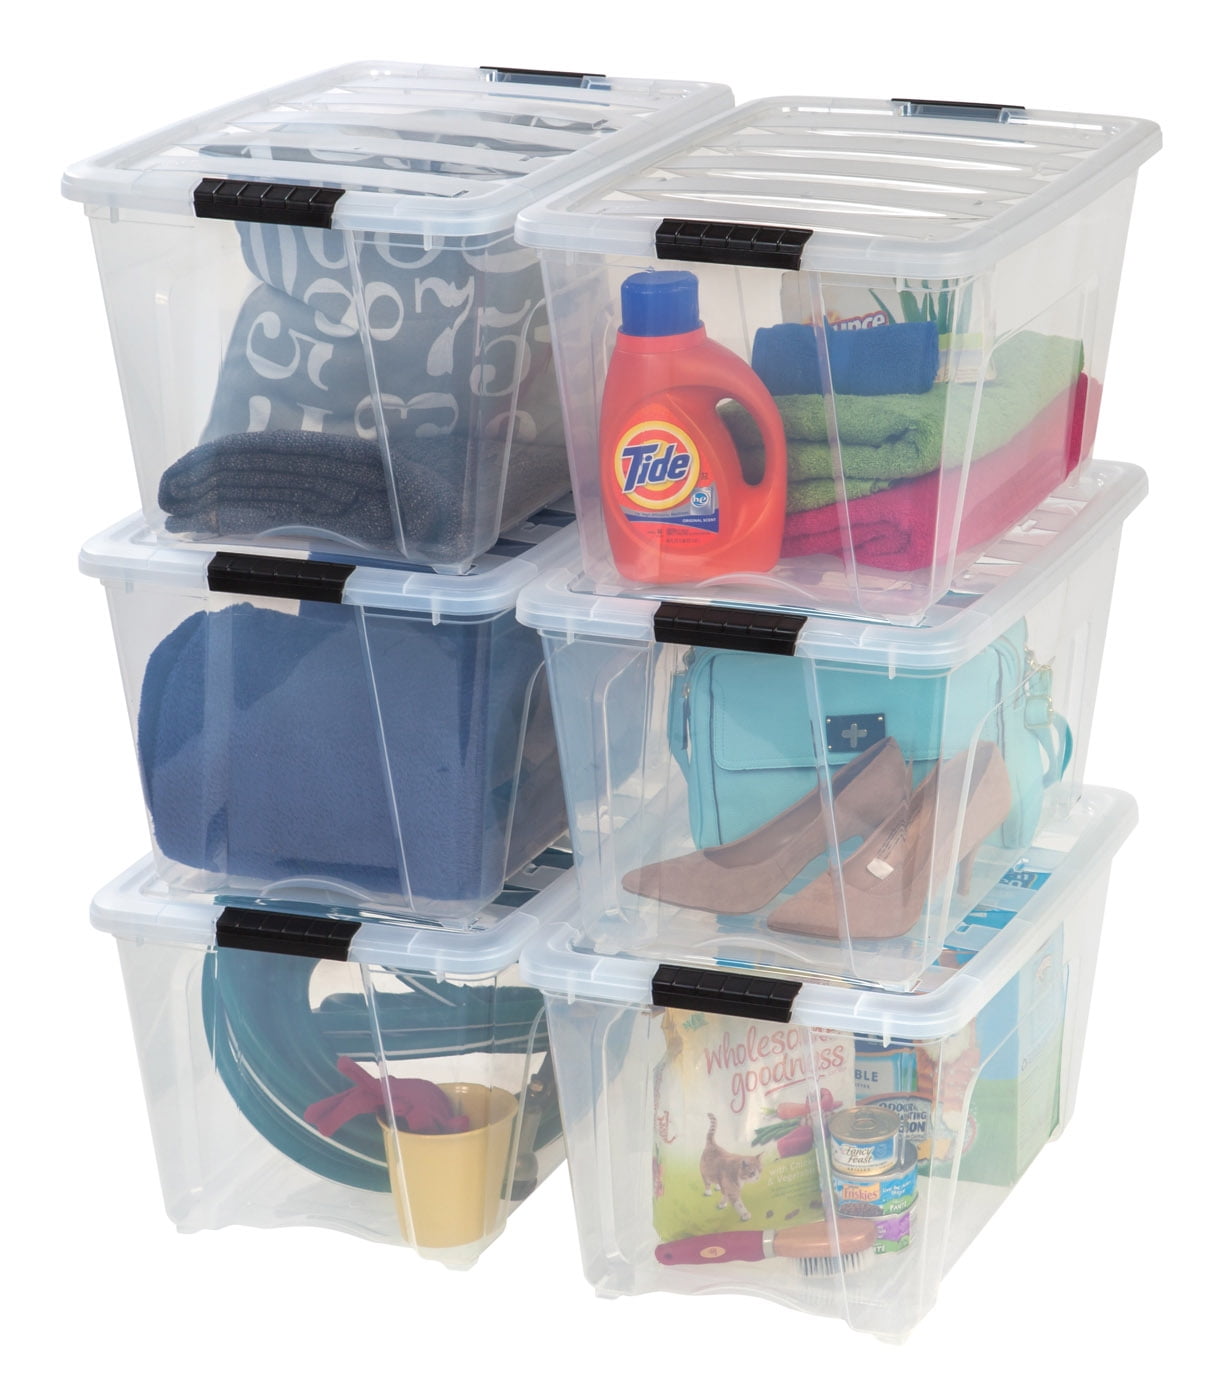 IRIS USA 54 Qt Clear Plastic Storage Box with Latches, 6 Pack